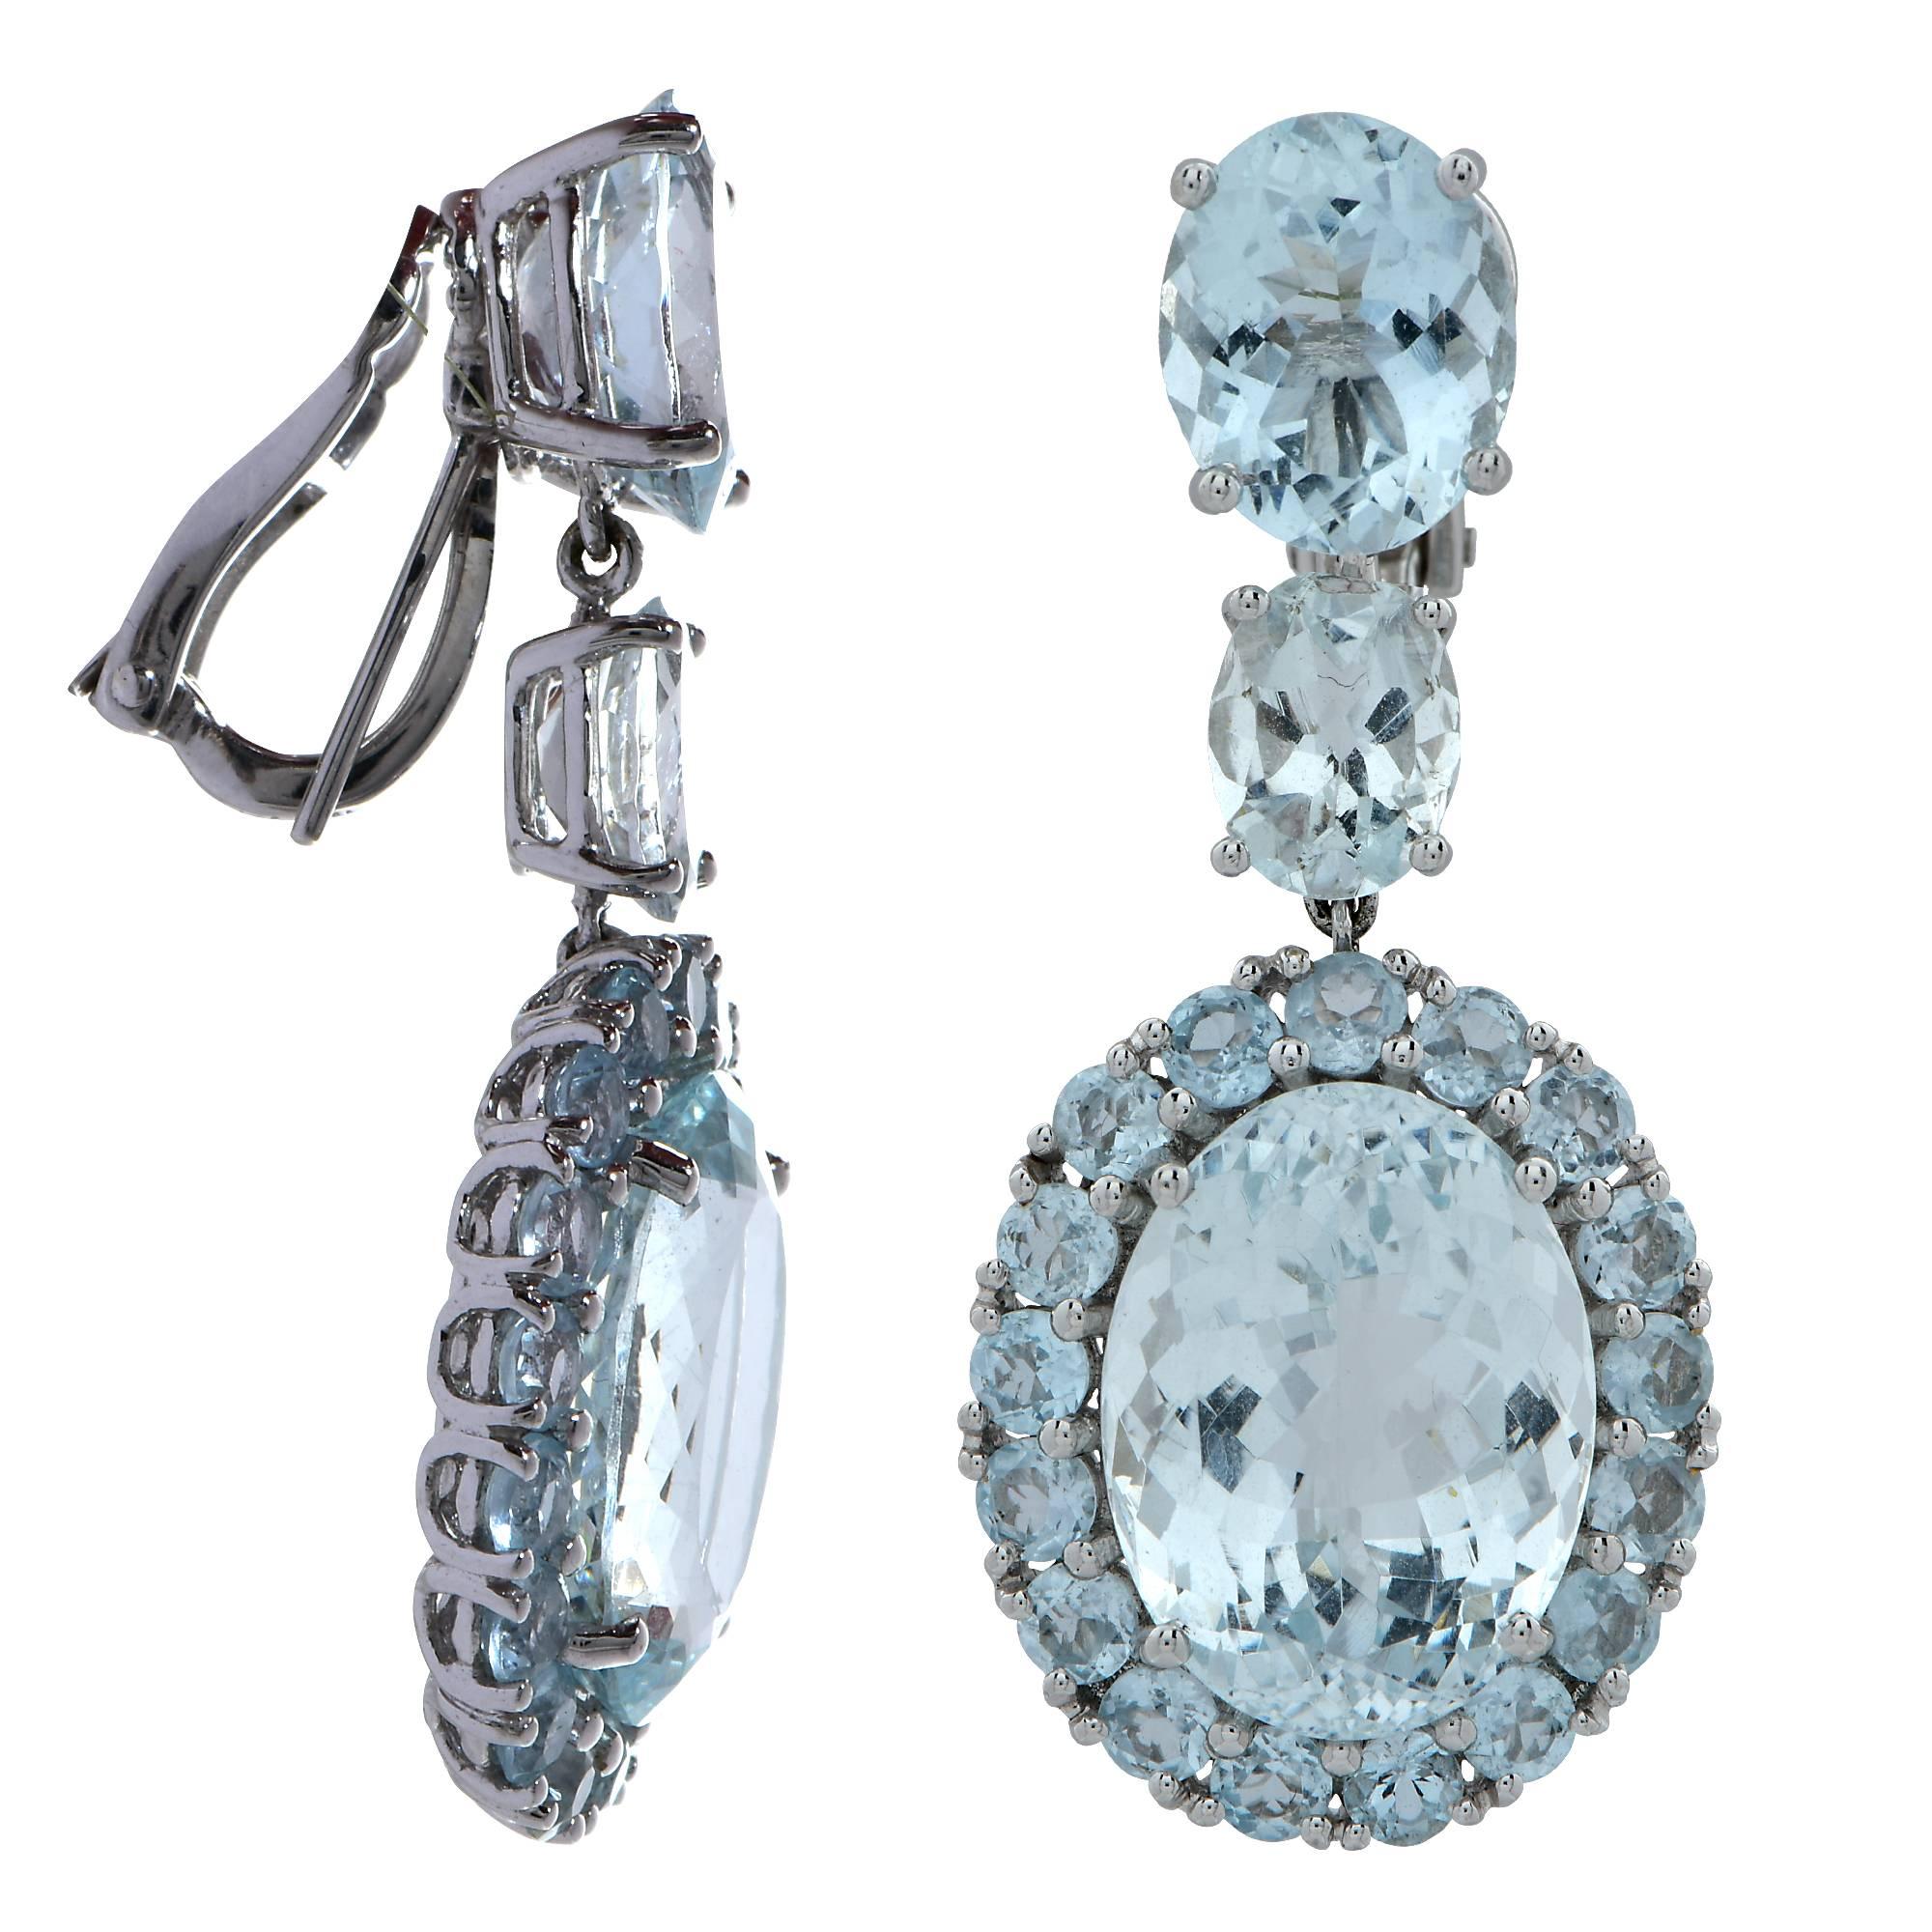 18k white gold dangle earrings featuring two brilliant cut oval Aquamarines weighing approximately 15 carats total, accenting the center Aquamarines are 38 round and oval cut Aquamarines weighing approximately 15 carats. The earrings measure 1.7